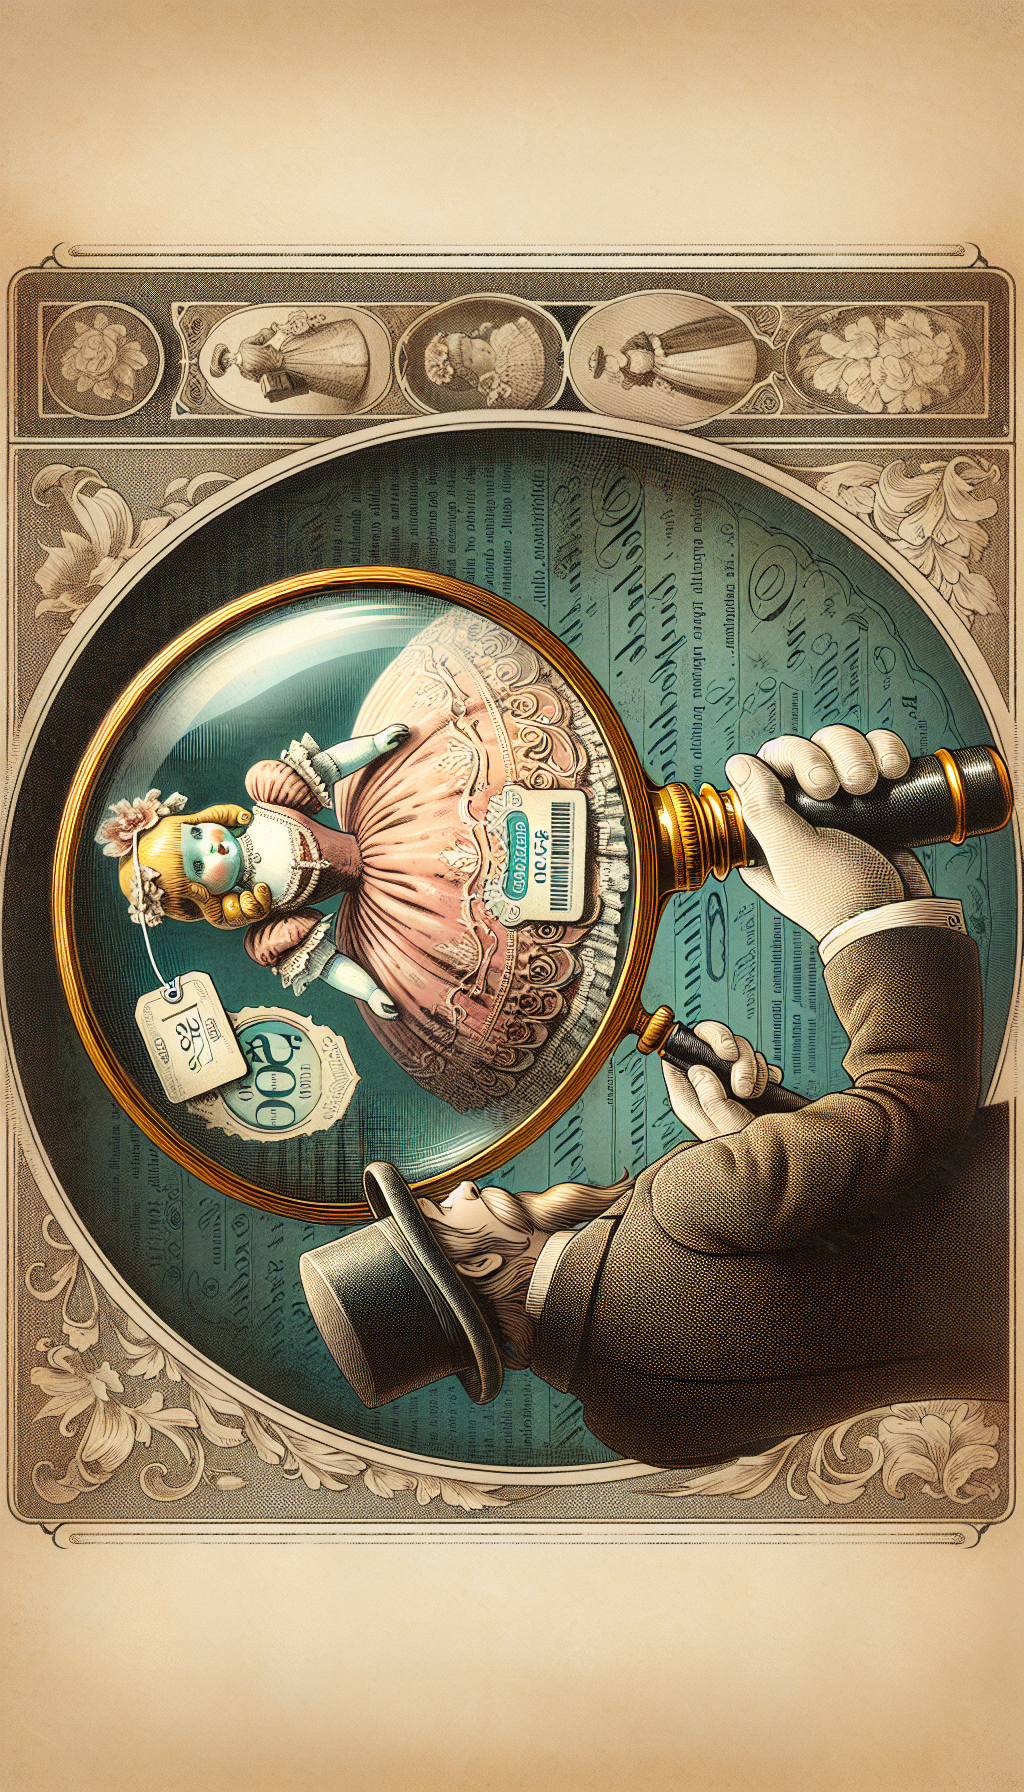 In a vignette-style illustration, a magnifying glass held by an invisible antiquarian focuses on the delicate features of an 1800s porcelain doll, with expertly painted details accentuating its antiquity. Through the lens, the doll's price tag multiplies and antique motifs, highlighting its era's distinctiveness and high value. Vintage patterning frames the scene, fusing the past’s allure with its present worth.